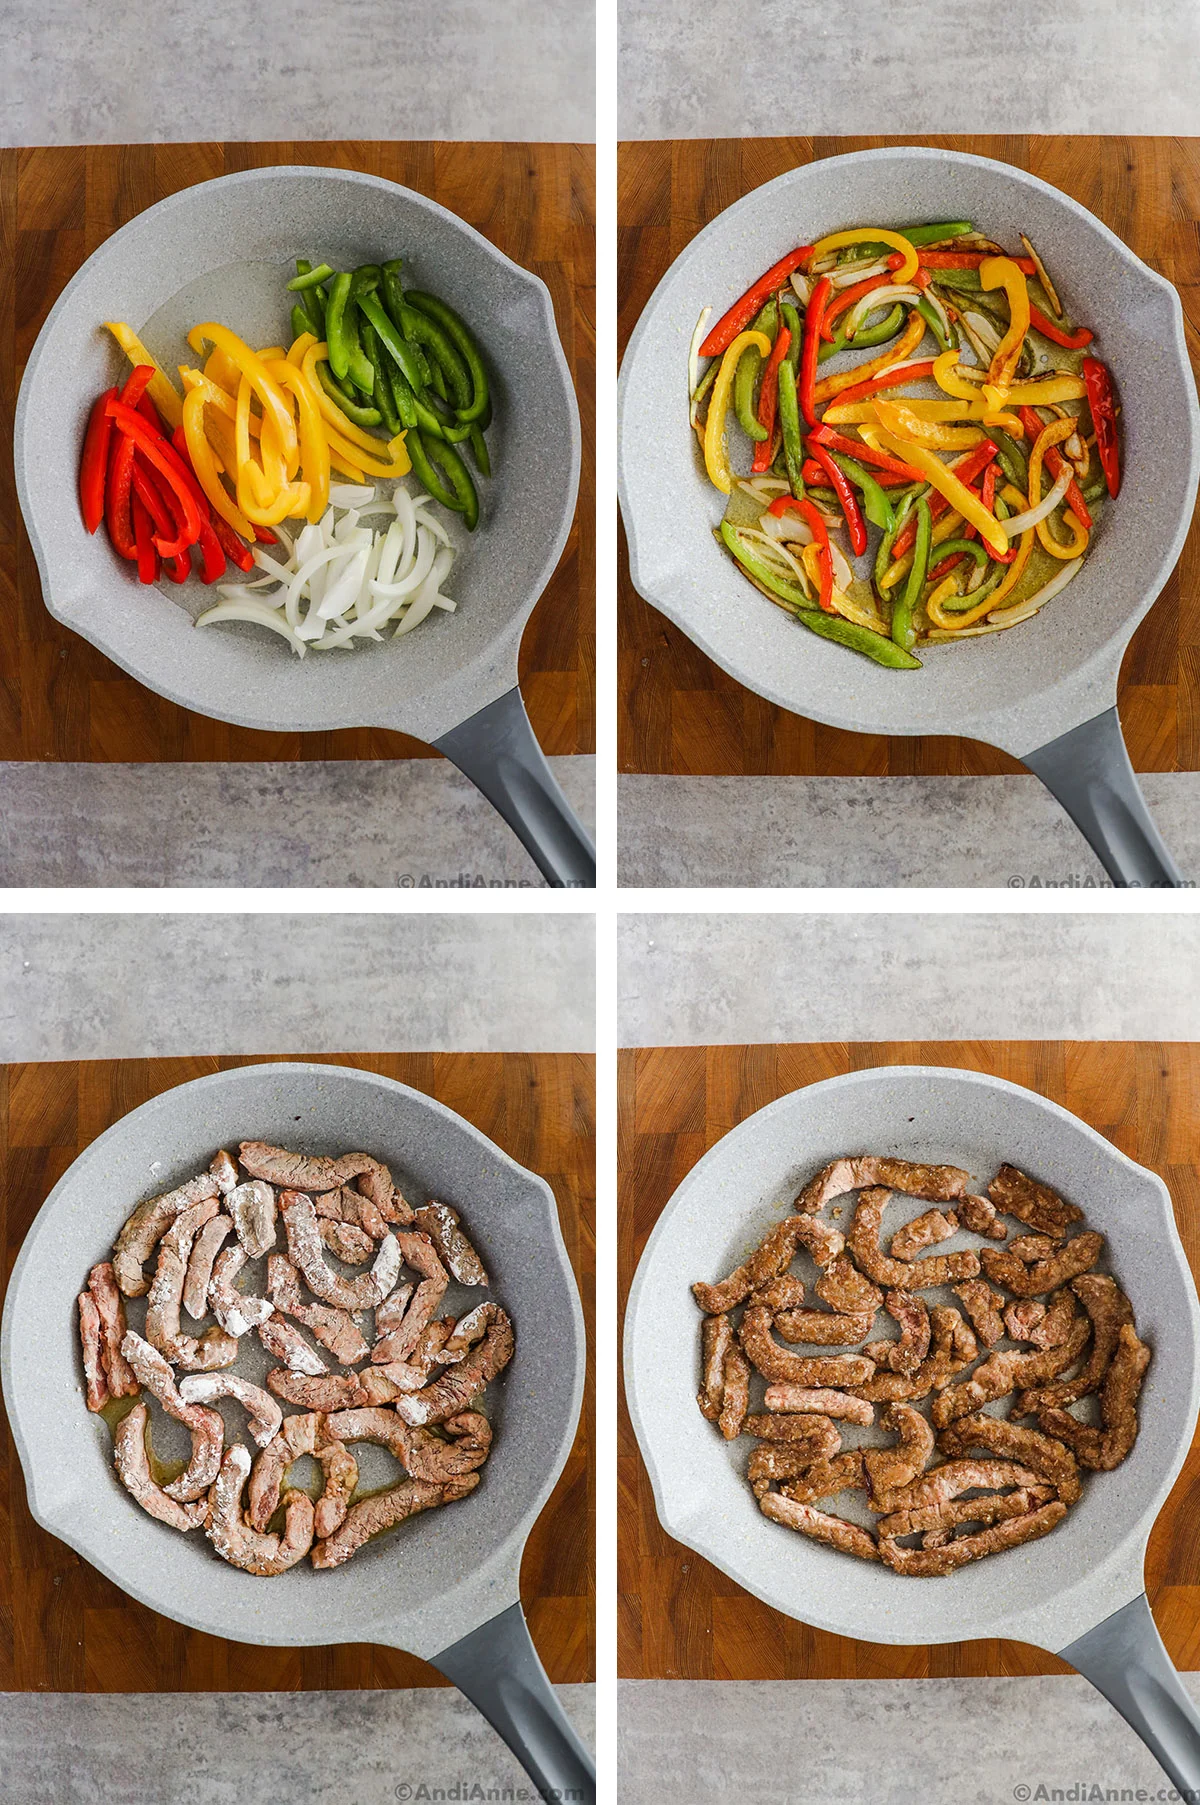 Sliced bell pepper in different colors with onion, first raw then cooked. Raw beef strips coated in cornstarch, first raw then cooked.